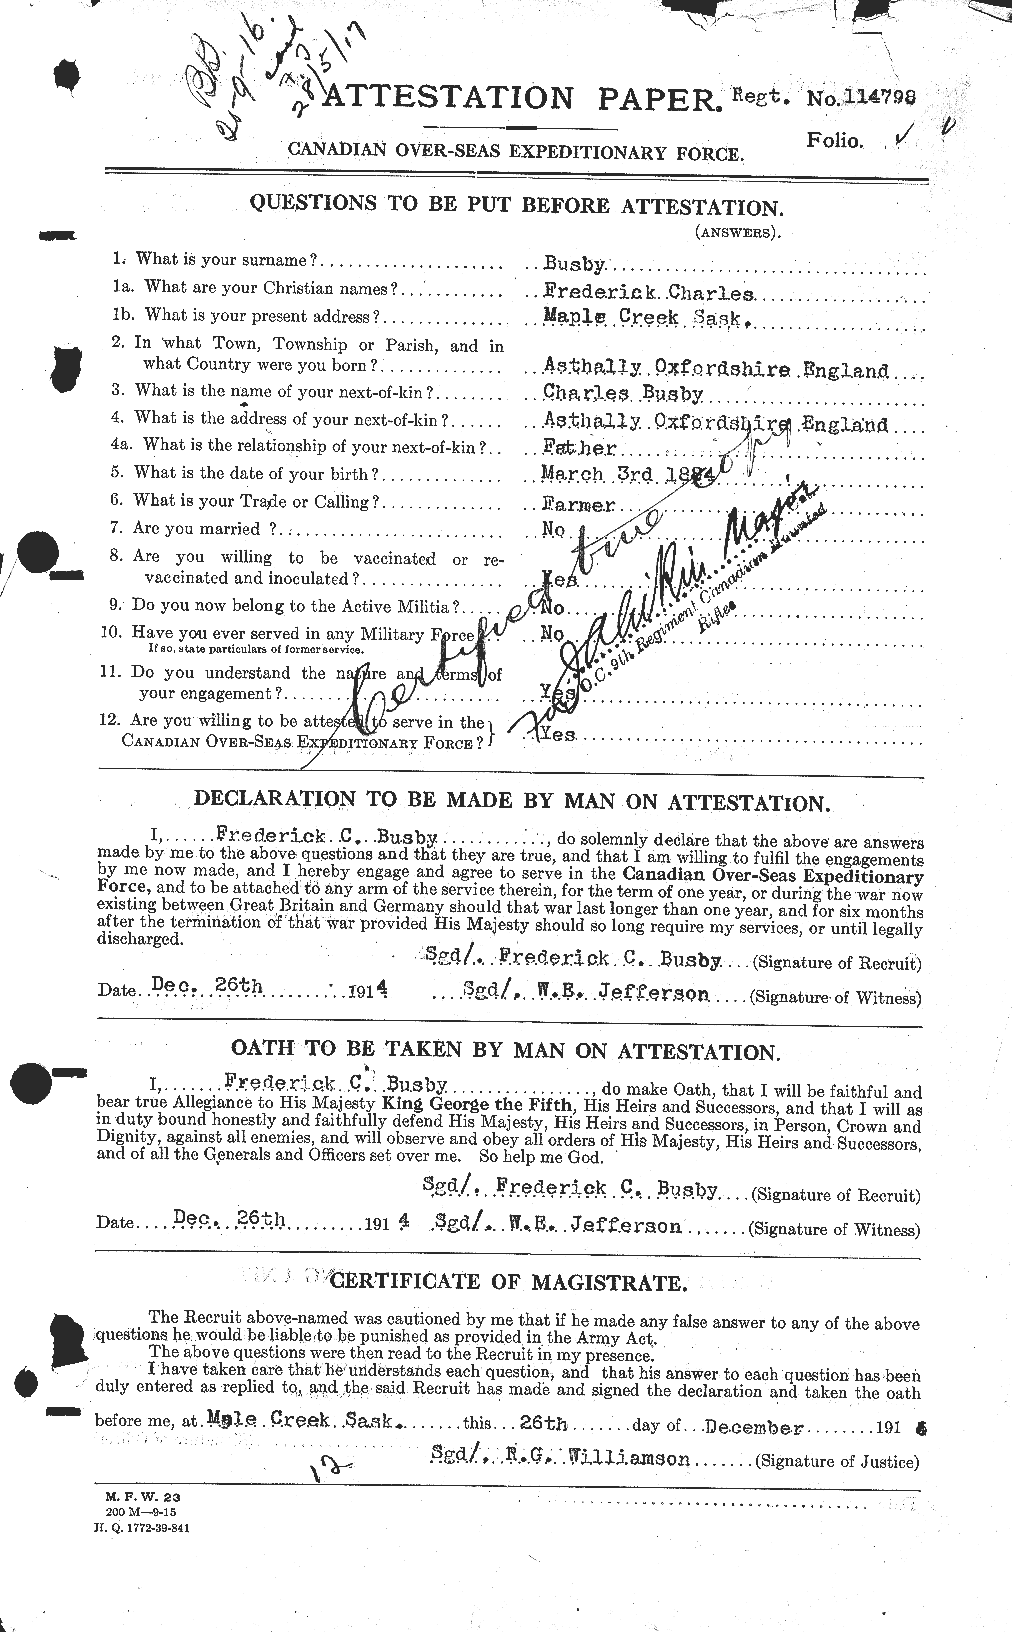 Personnel Records of the First World War - CEF 272864a